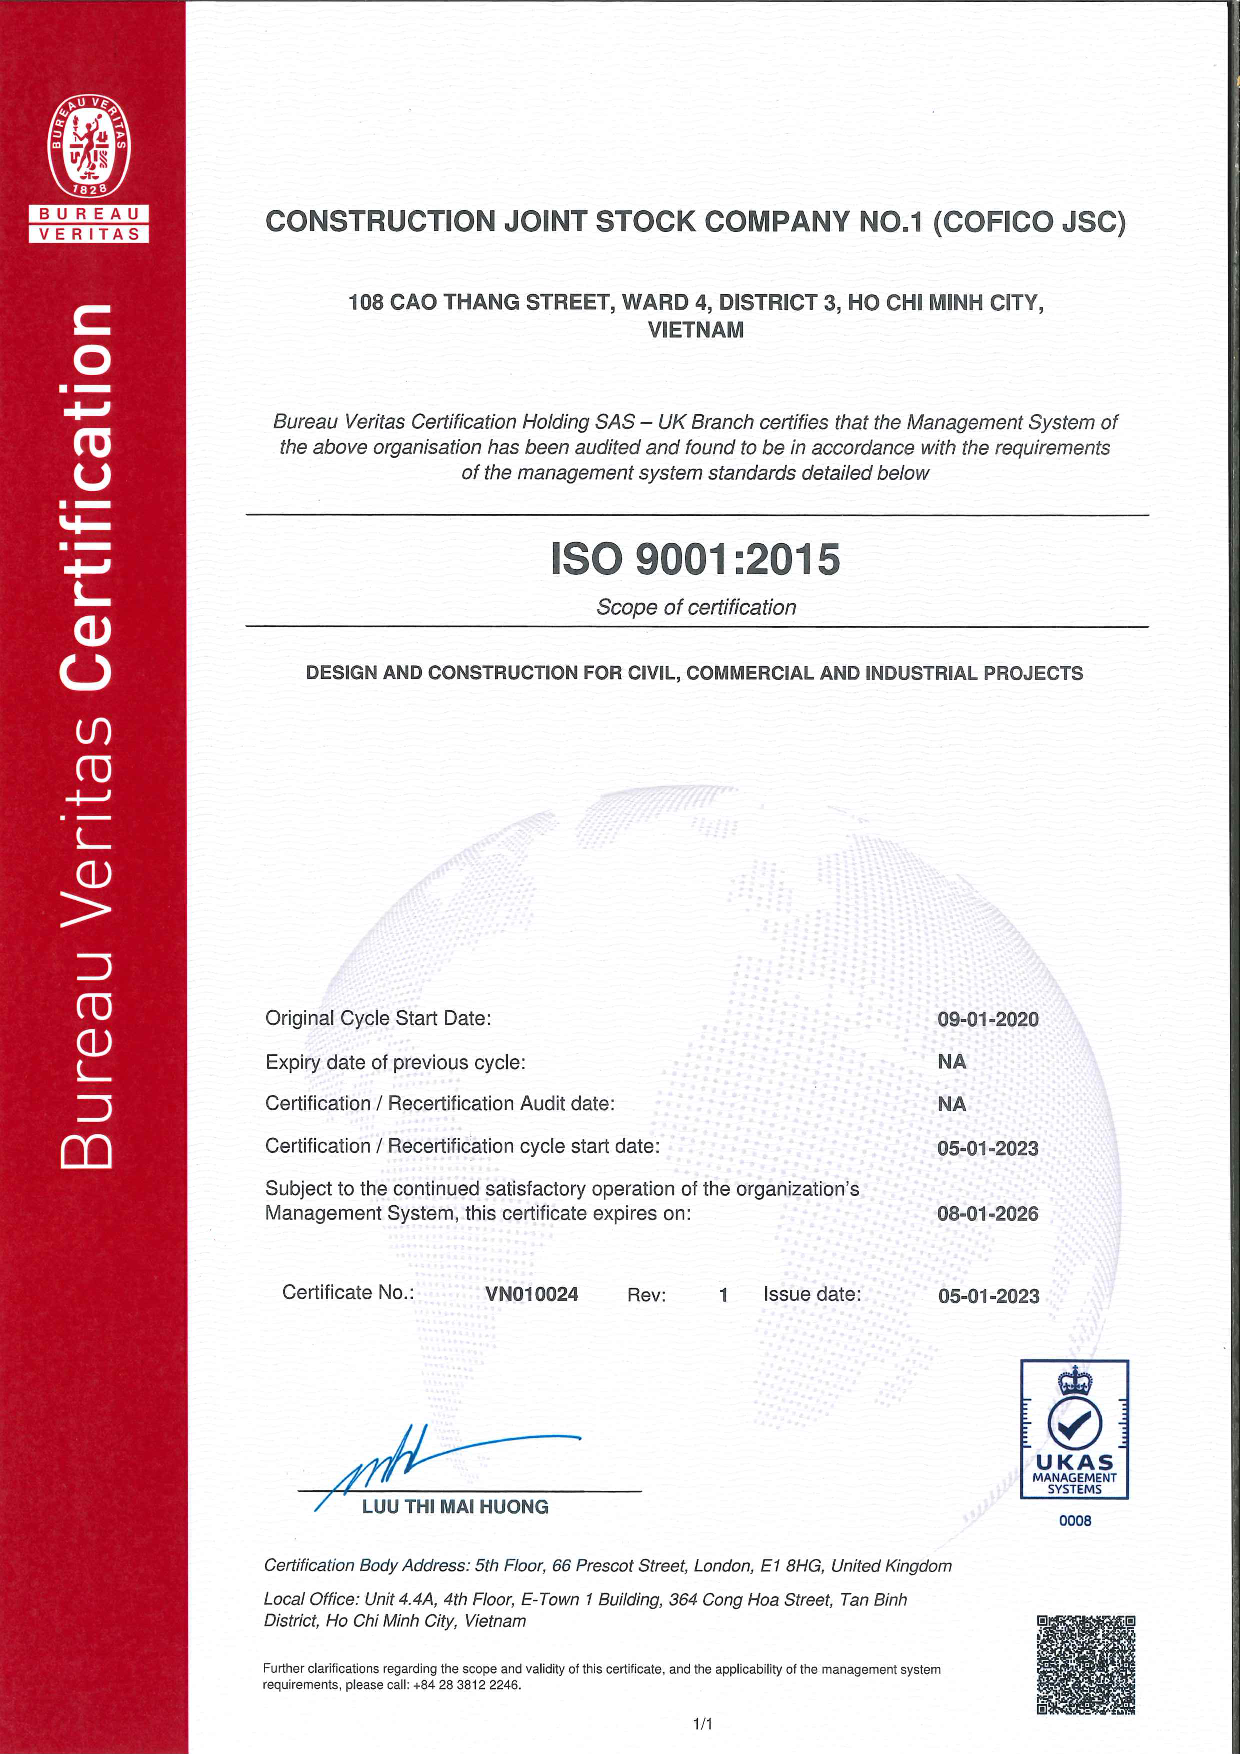 iso9001certificate2014